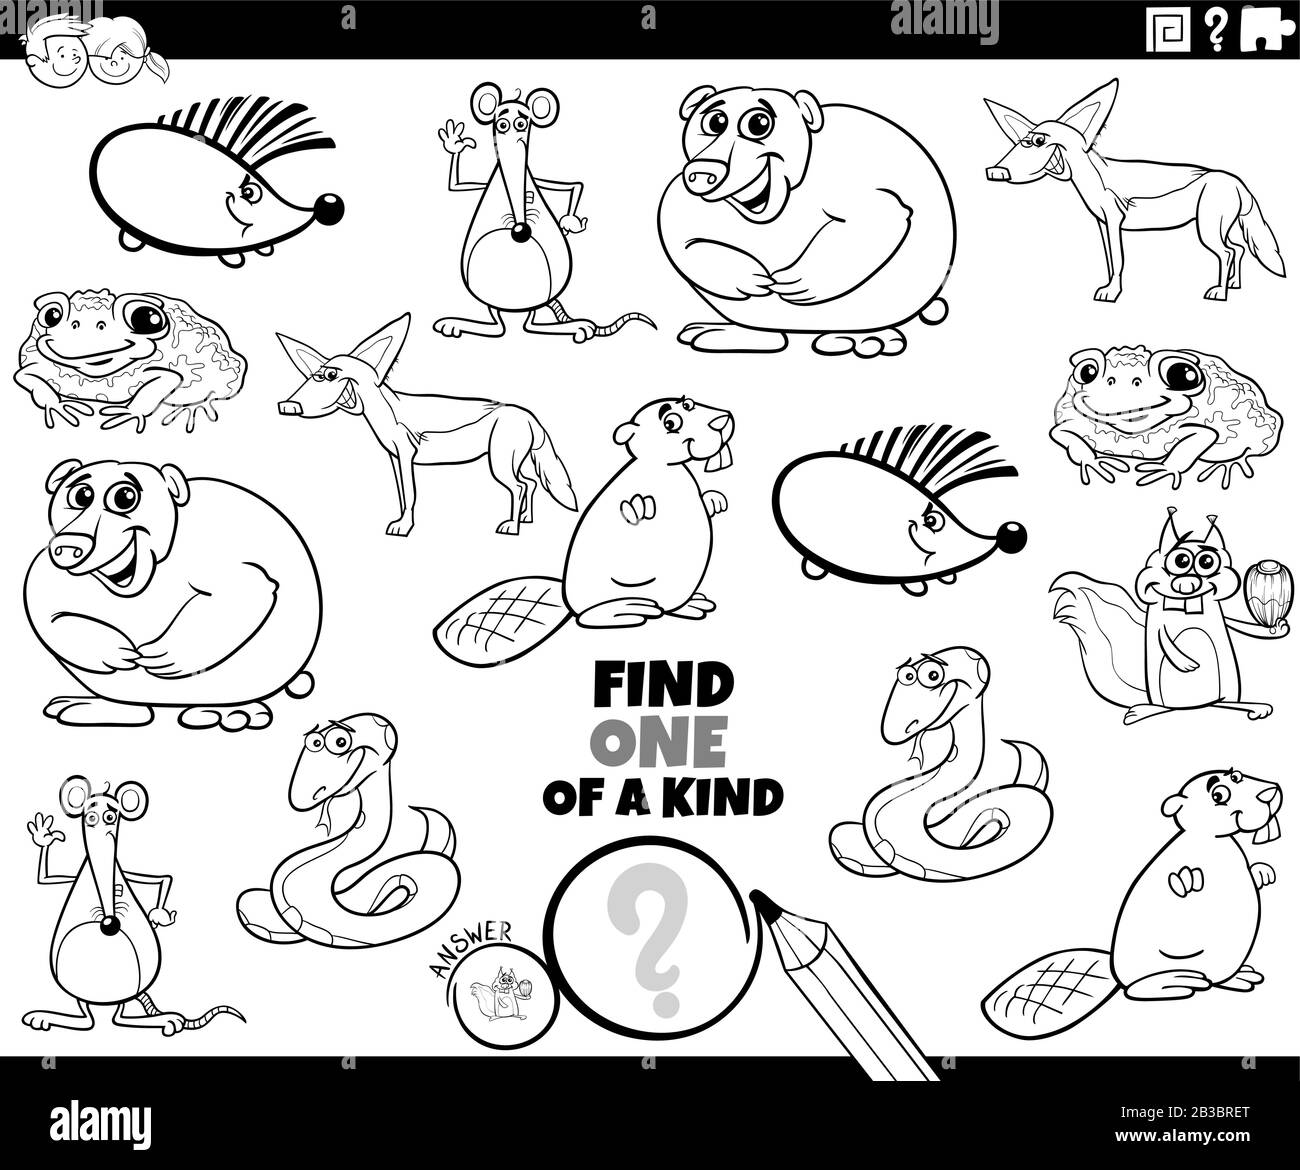 Black and White Cartoon Illustration of Find One of a Kind Picture Educational Game with Funny Wild Animal Characters Coloring Book Page Stock Vector